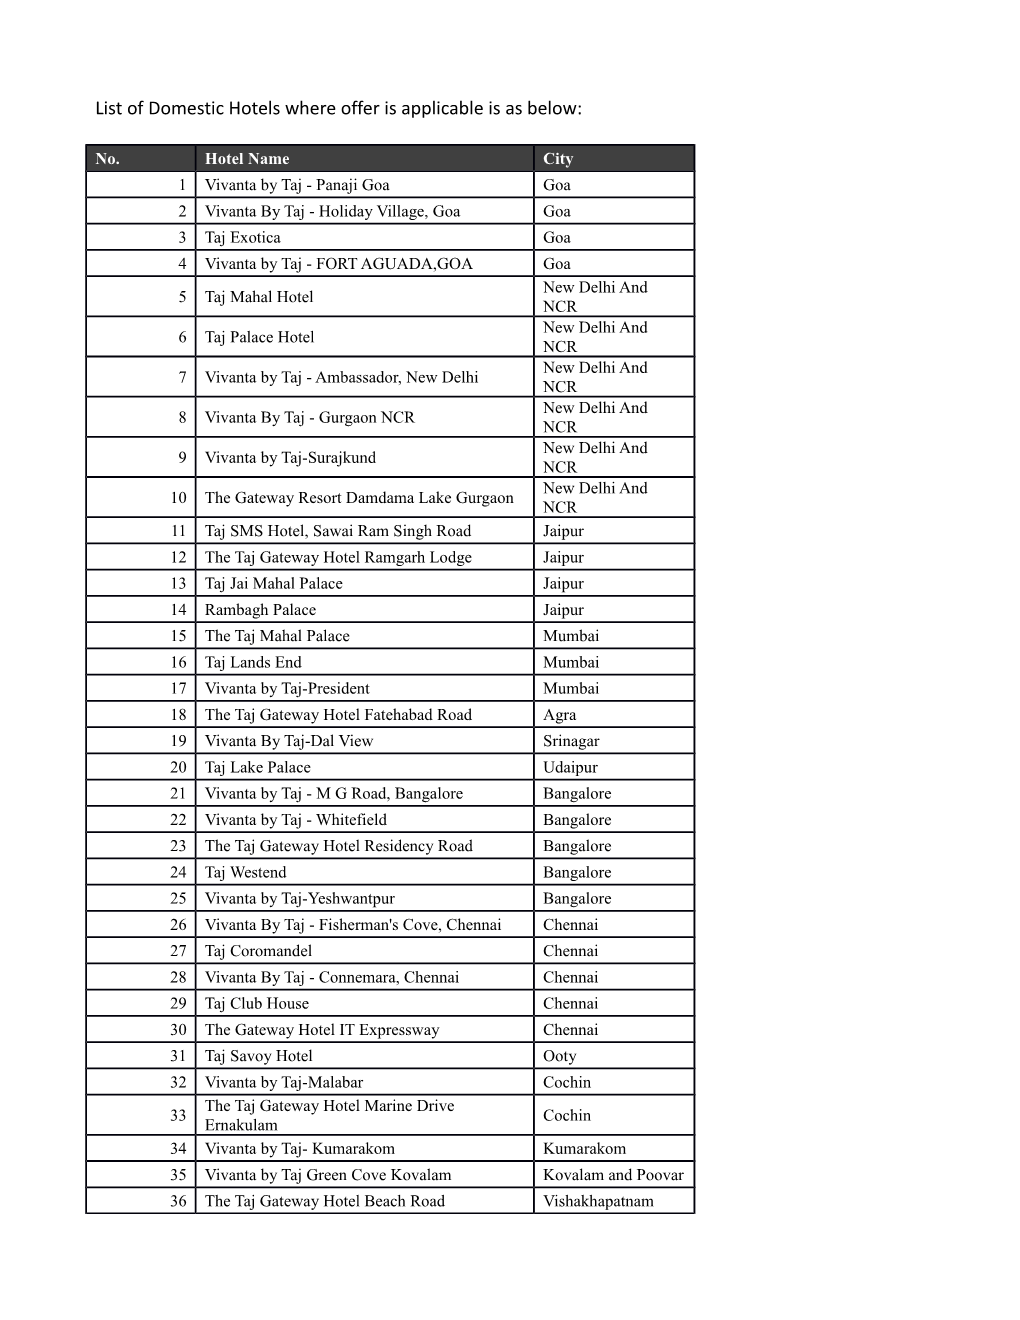 List of Domestic Hotels Where Offer Is Applicable Is As Below